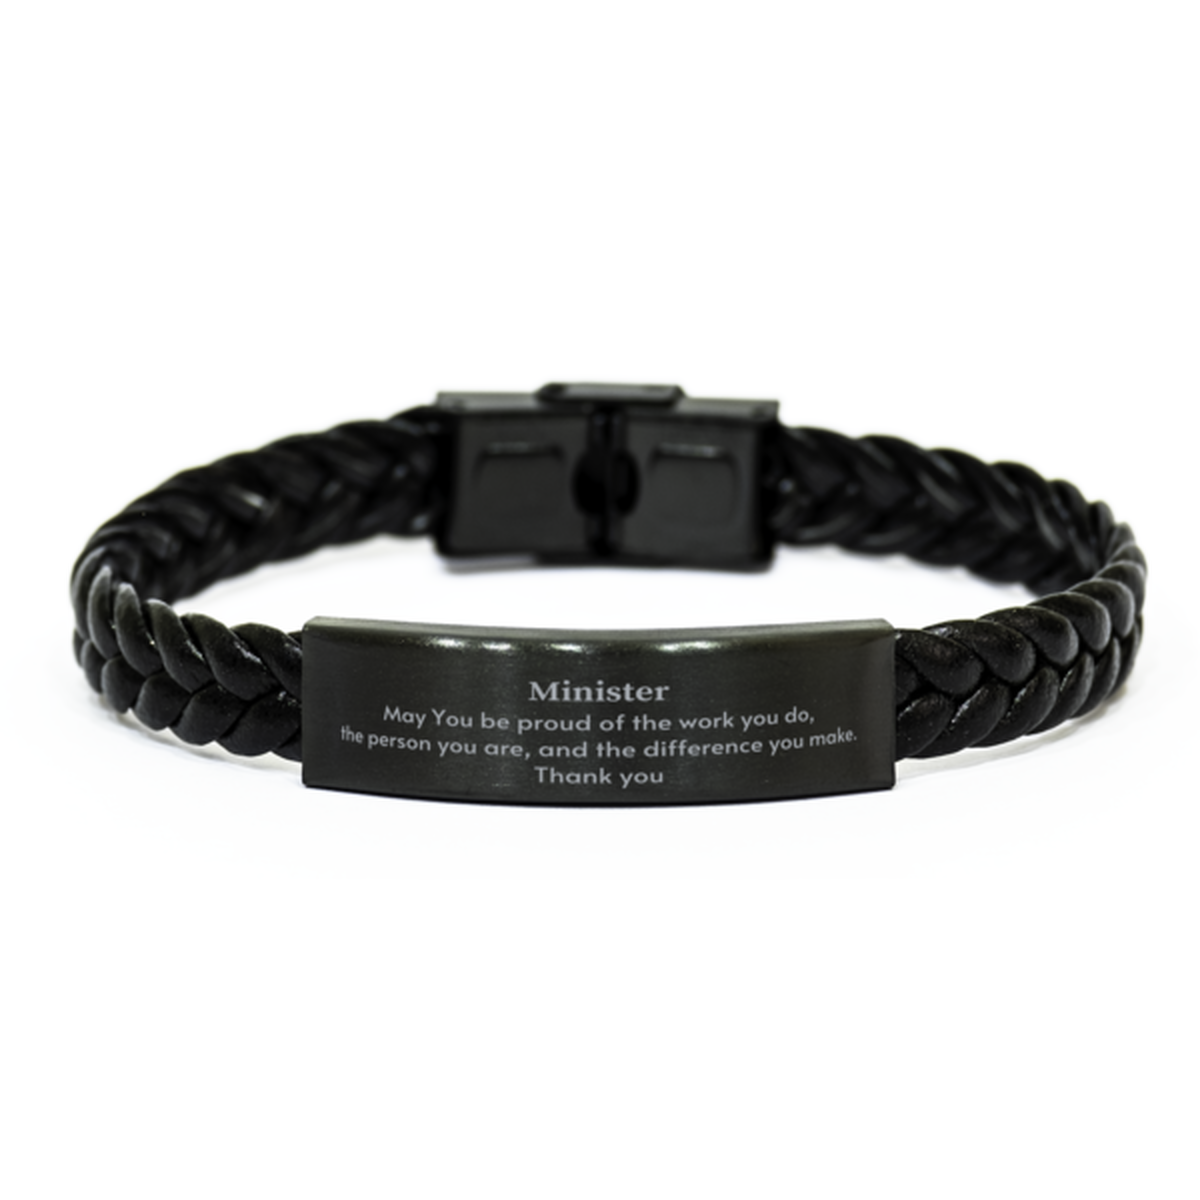 Heartwarming Braided Leather Bracelet Retirement Coworkers Gifts for Minister, Minister May You be proud of the work you do, the person you are Gifts for Boss Men Women Friends